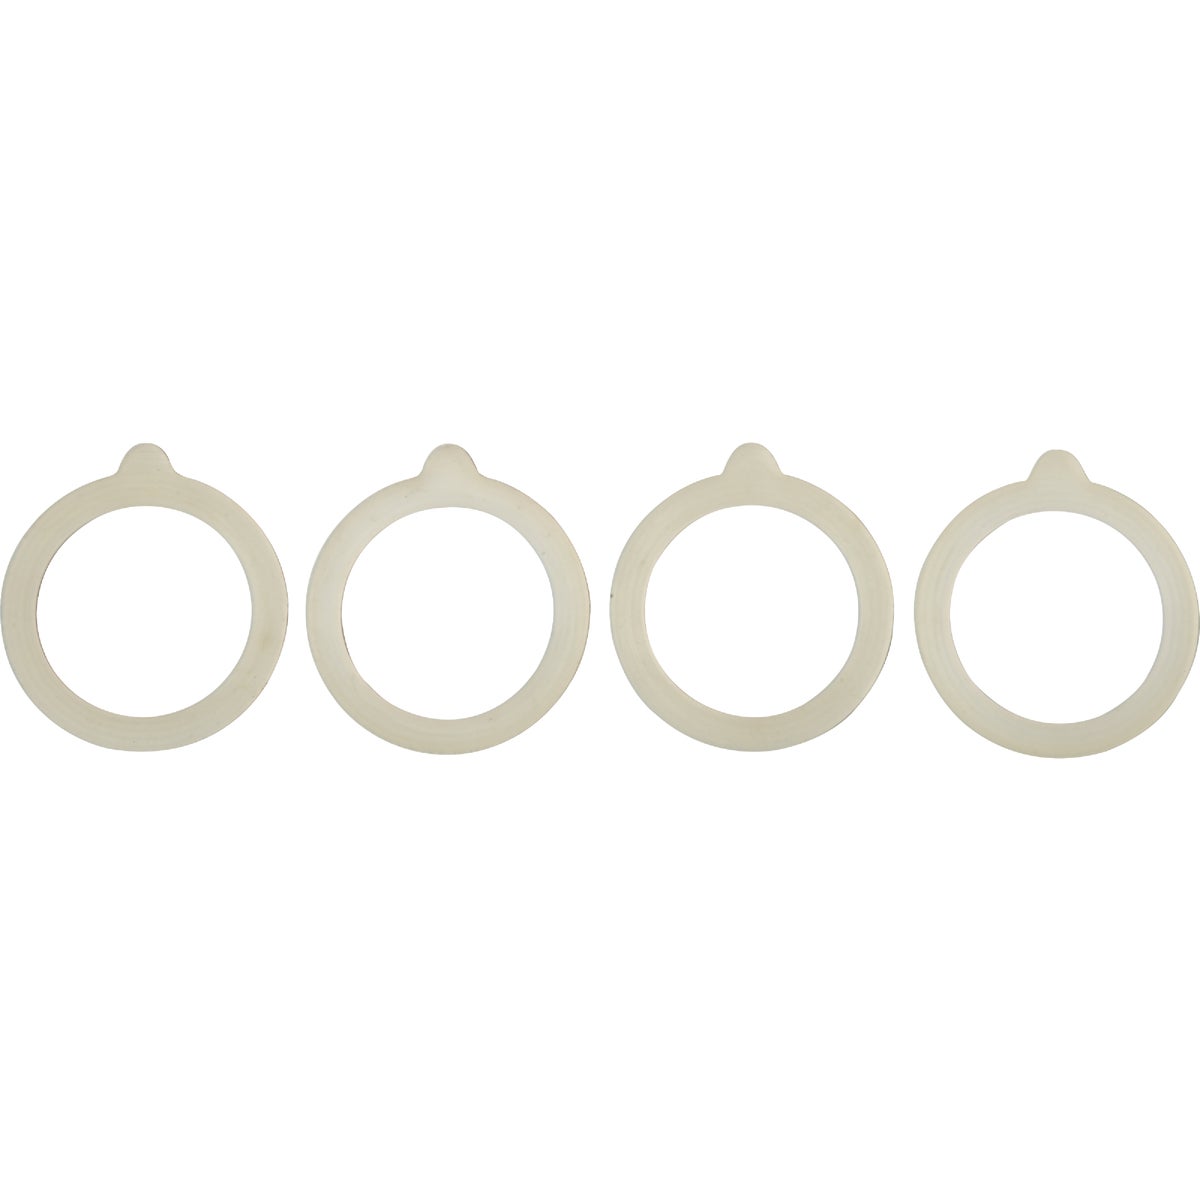 Item 630101, Replacement gasket for preserve and storage jars.